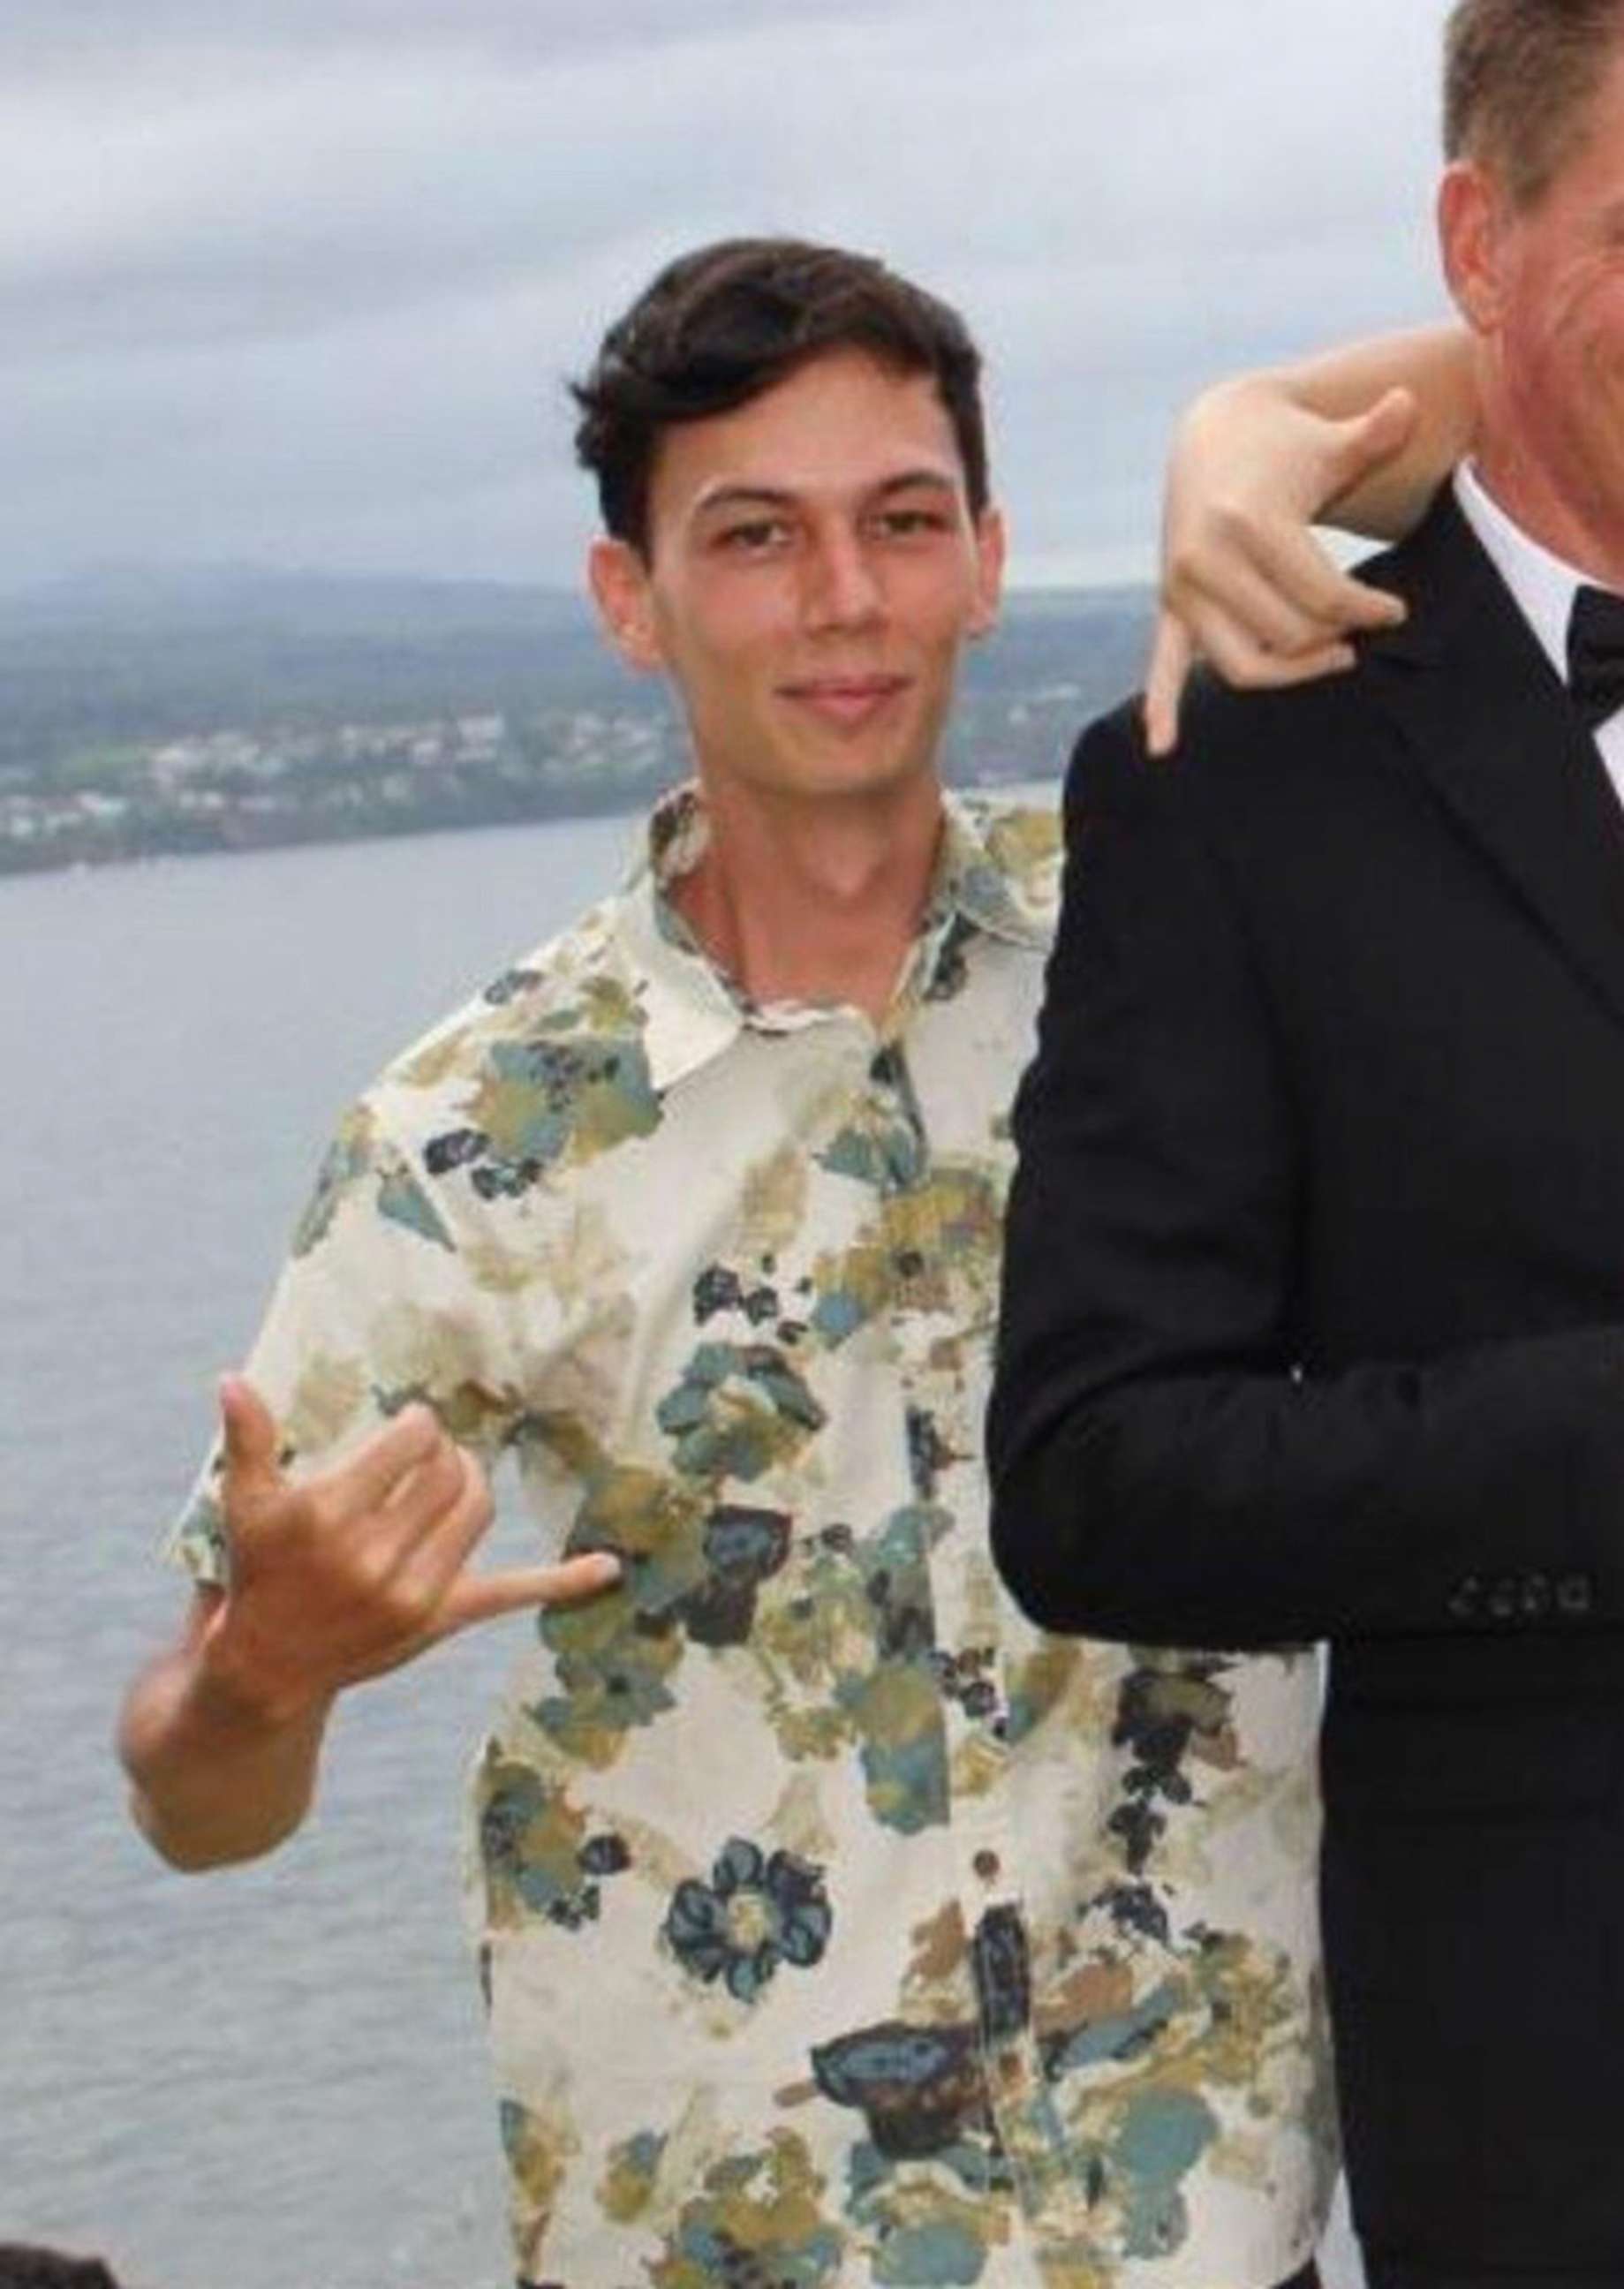 PHOTO: Kyle Brittain, 27, pictured in a photo shared by family members, vanished Aug. 30, 2019, after heading out on a solo hike on Hawaii's Big Island, Hawaii police said.